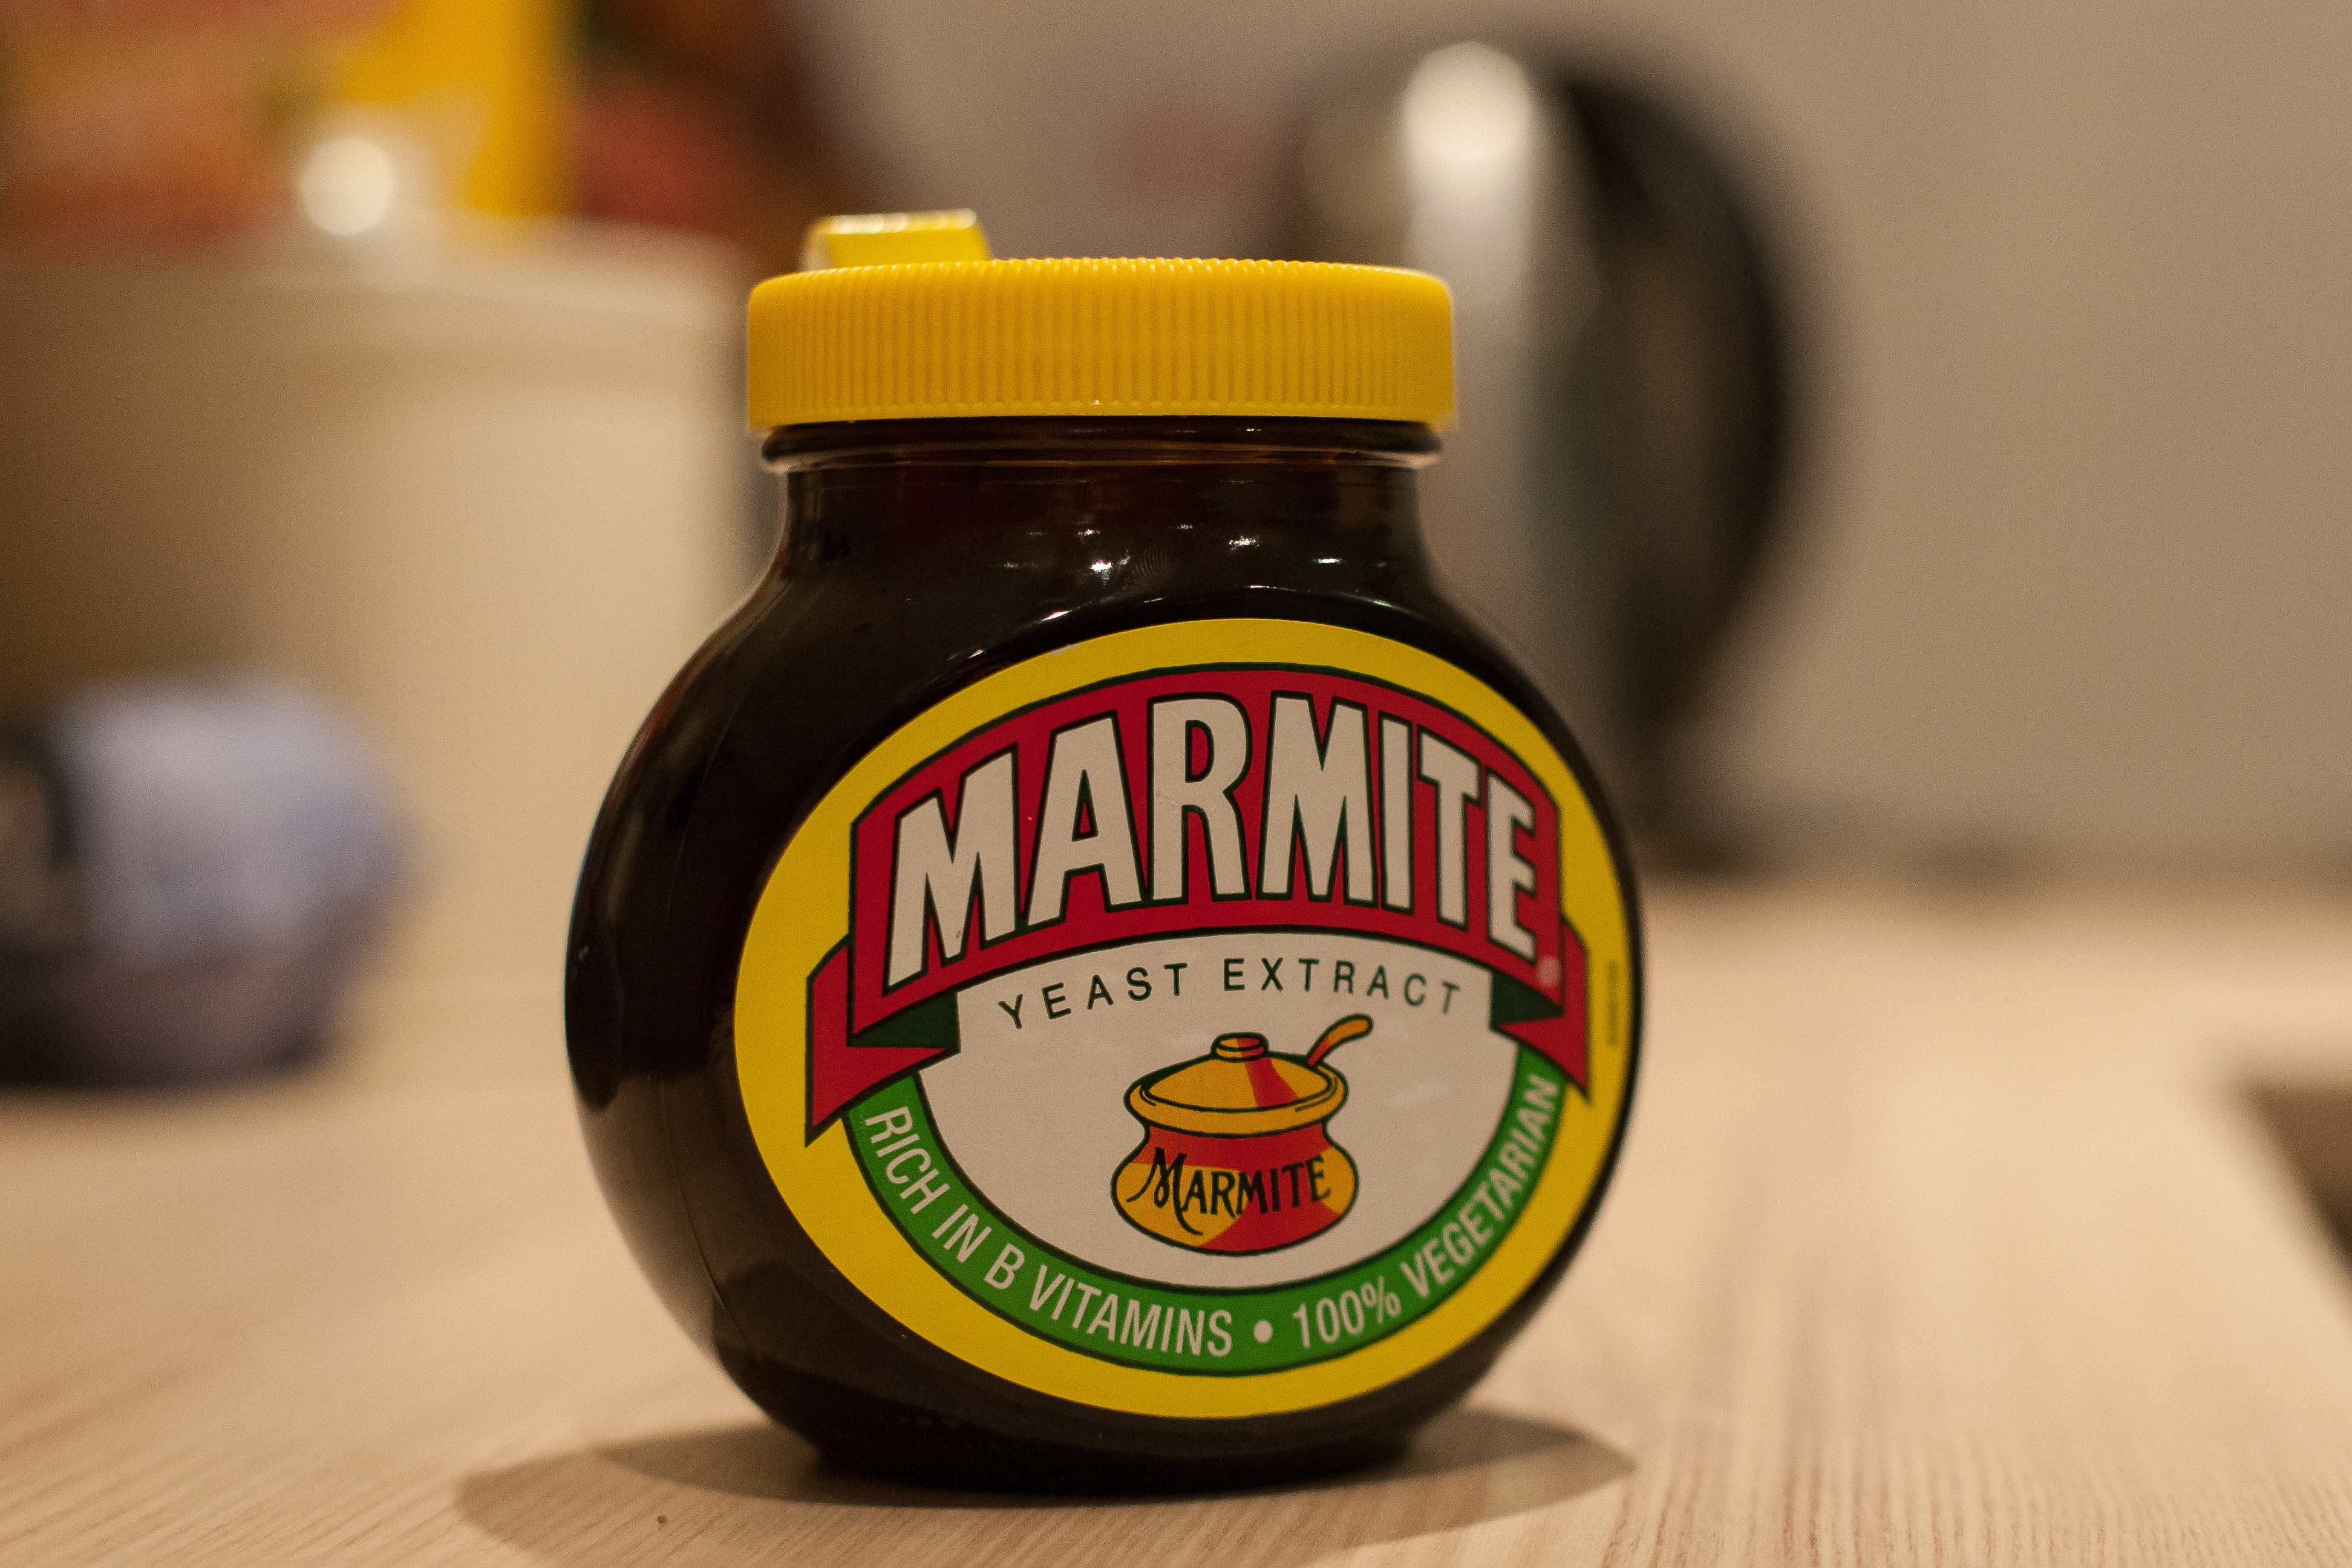 What Is Marmite, and Why Is It So Good?